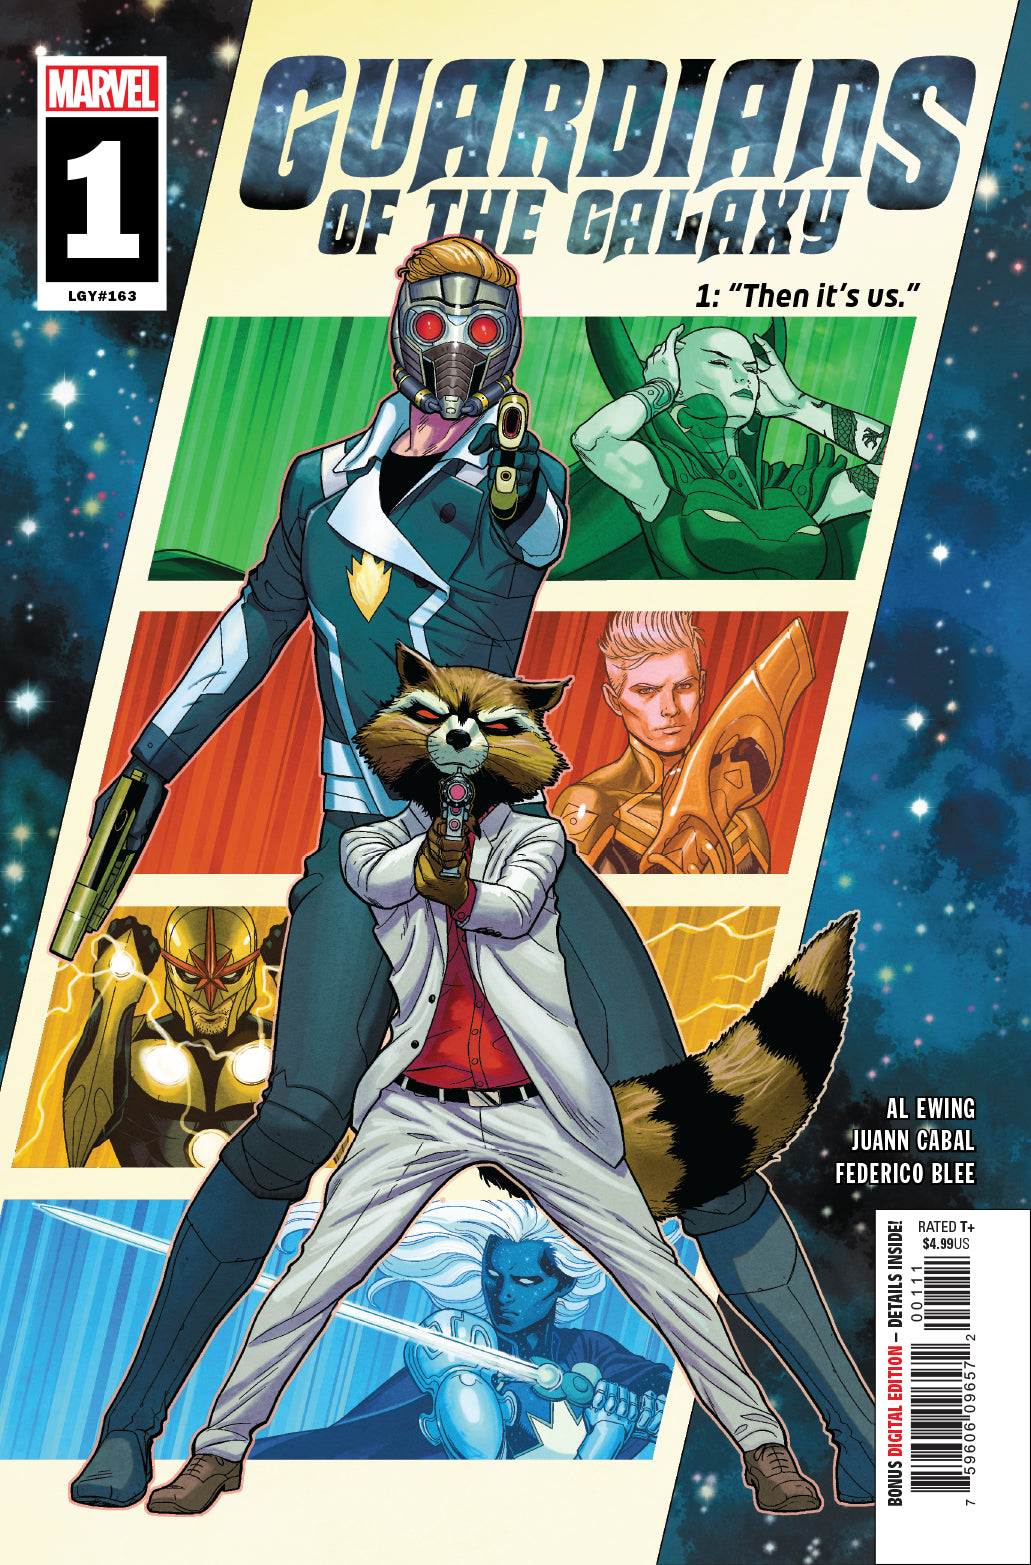 GUARDIANS OF THE GALAXY #1 to #3 | Game Master's Emporium (The New GME)